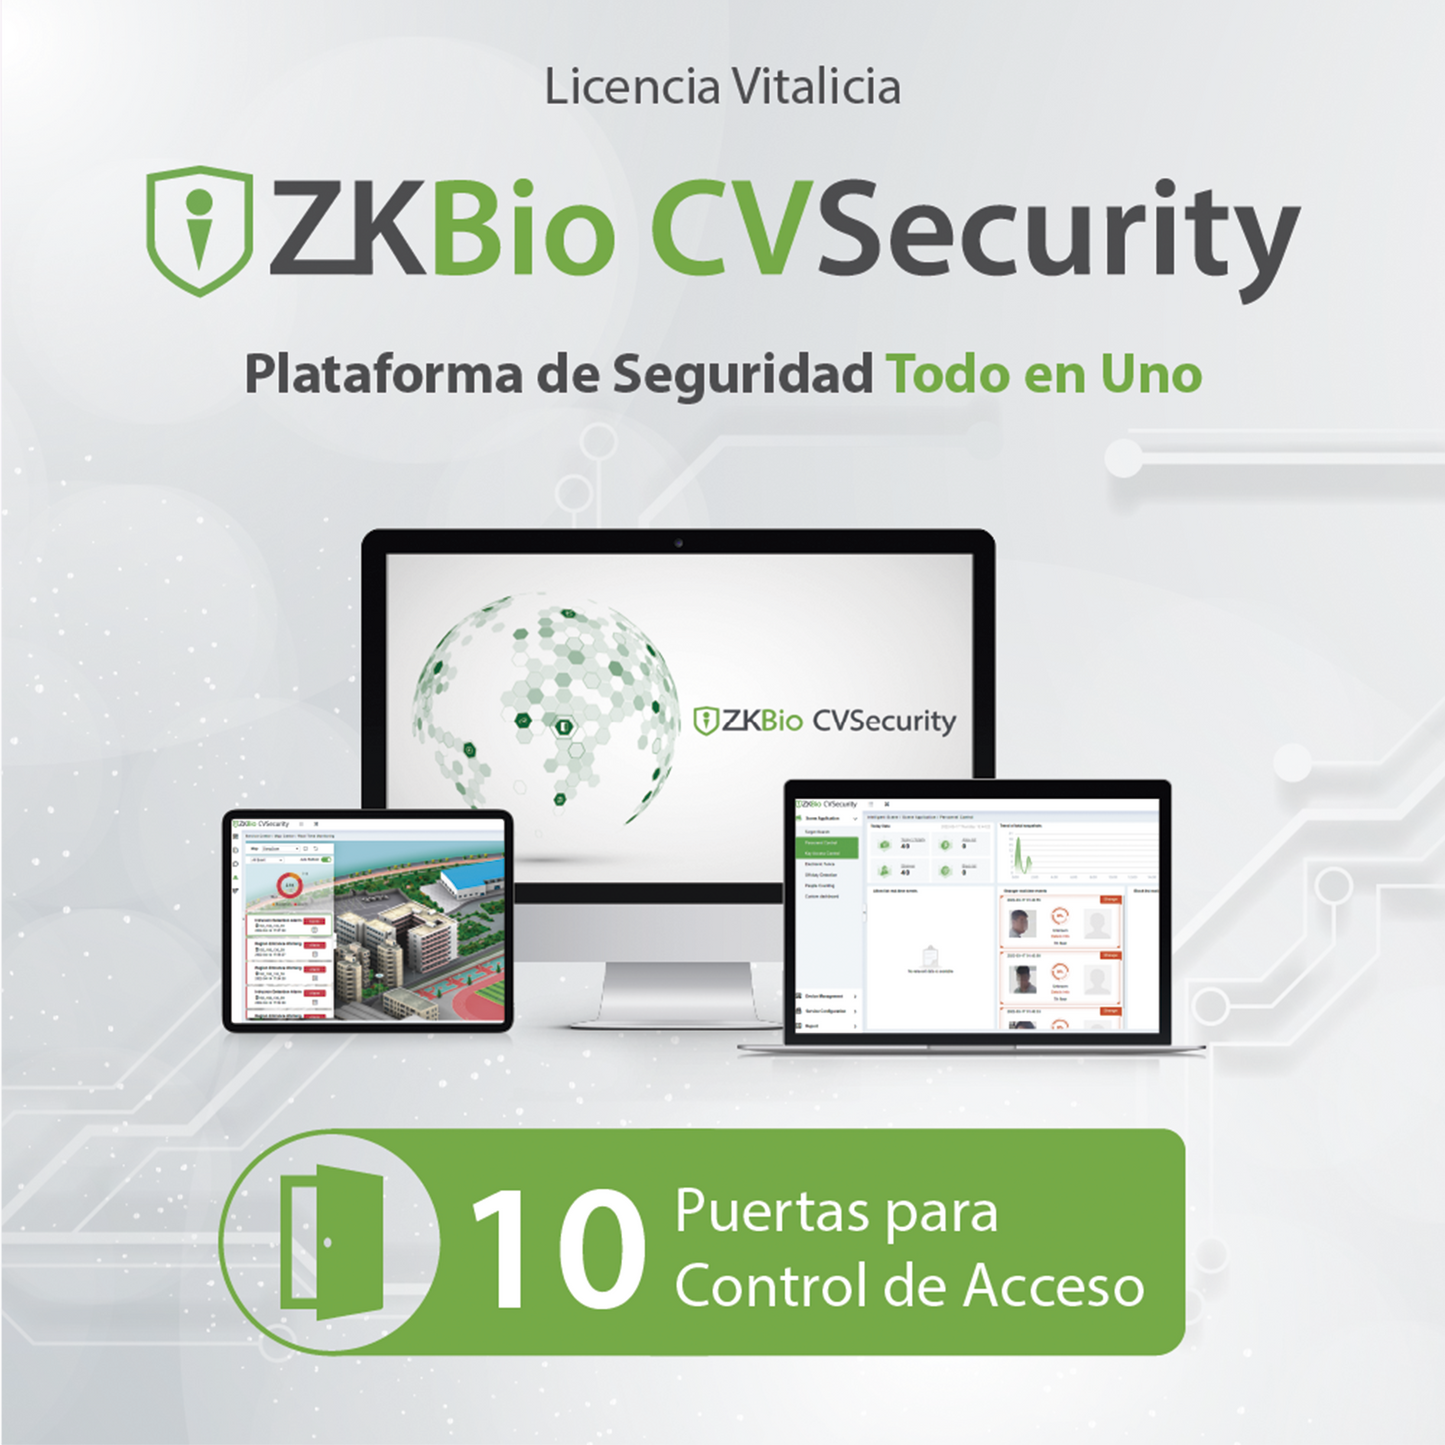 ZKBio CVsecurity License Activates 10 Doors for Access Control